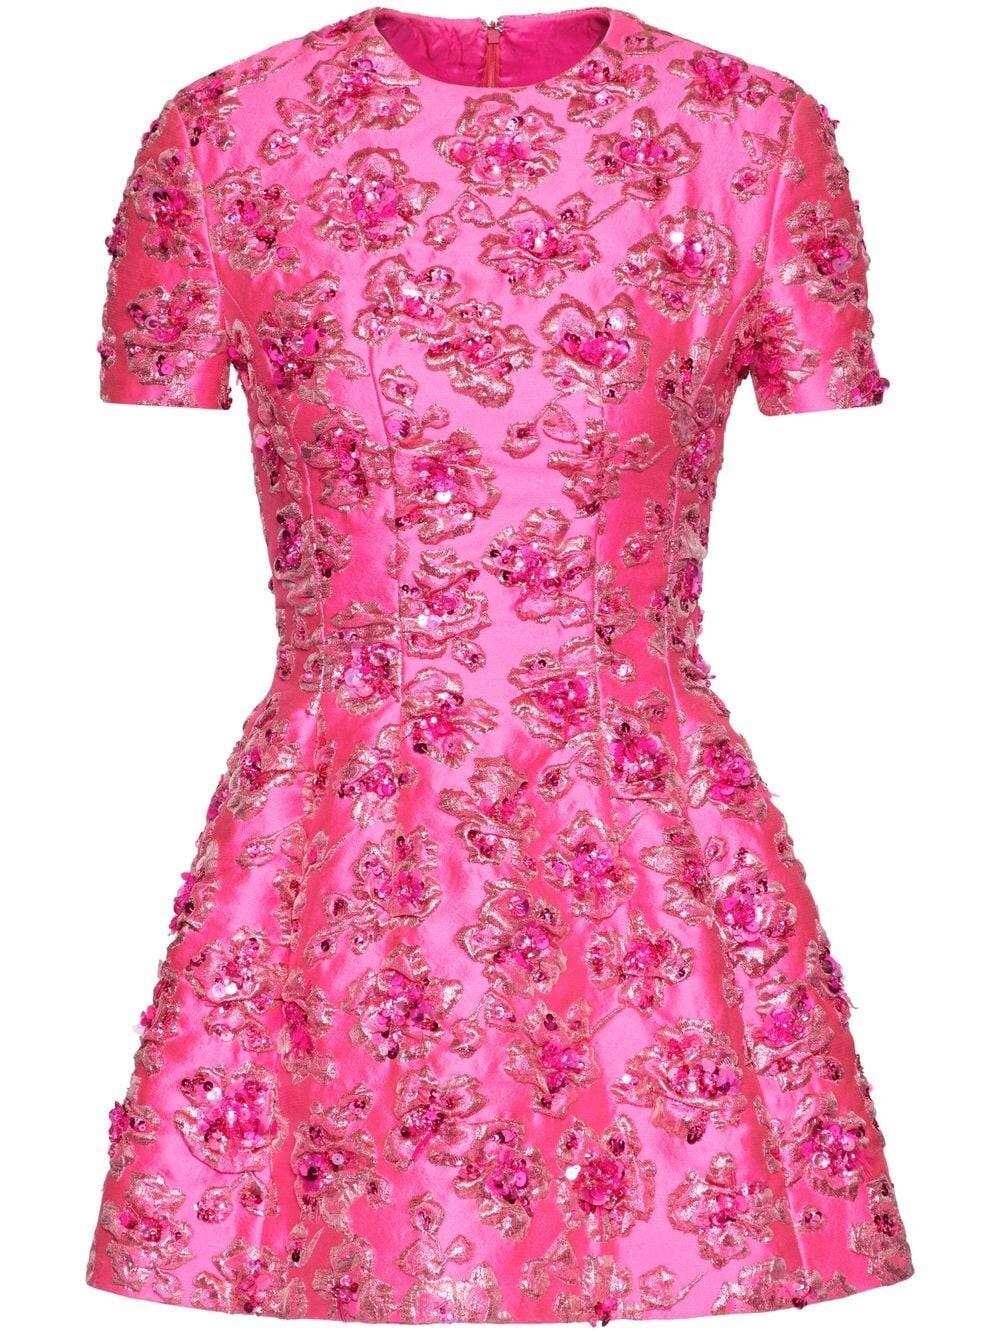 Mini Dress (Pink Embroidered Floral) | style